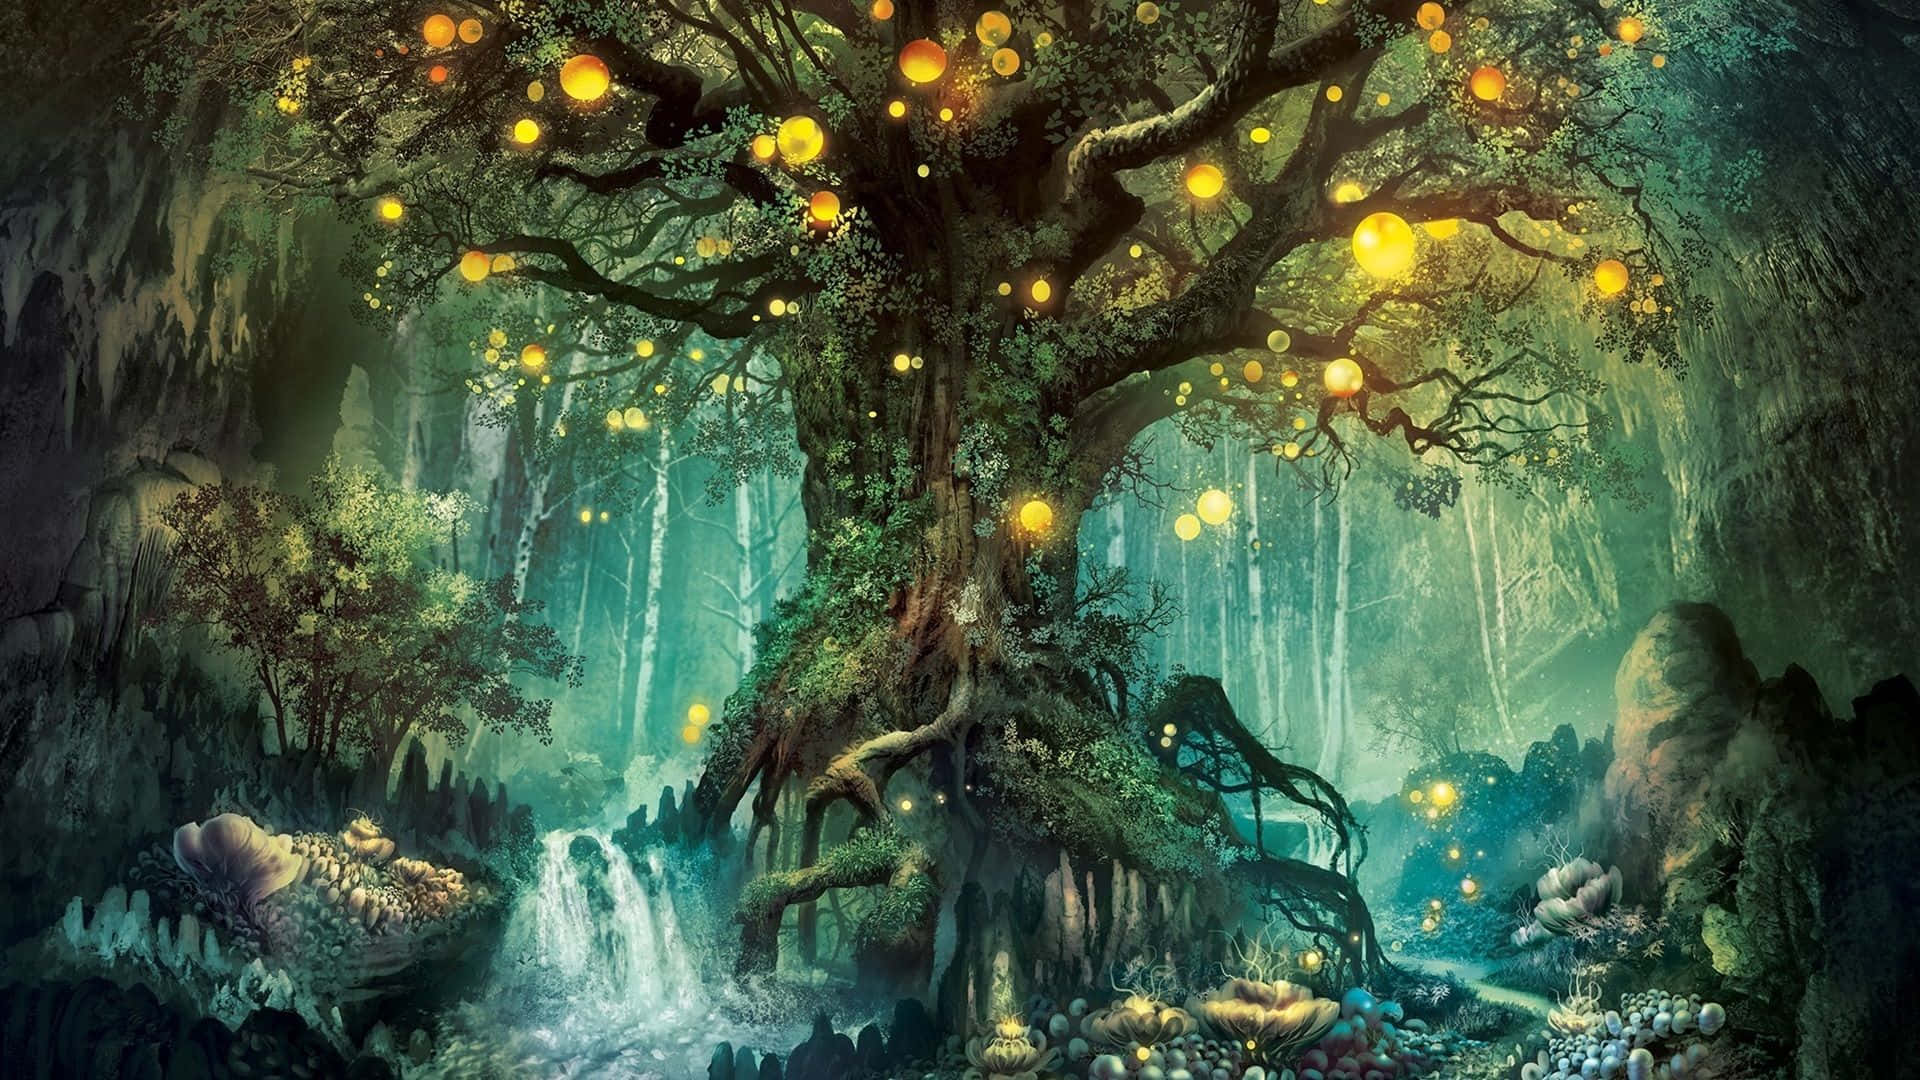 A magical scene in Fairy Forest Wallpaper